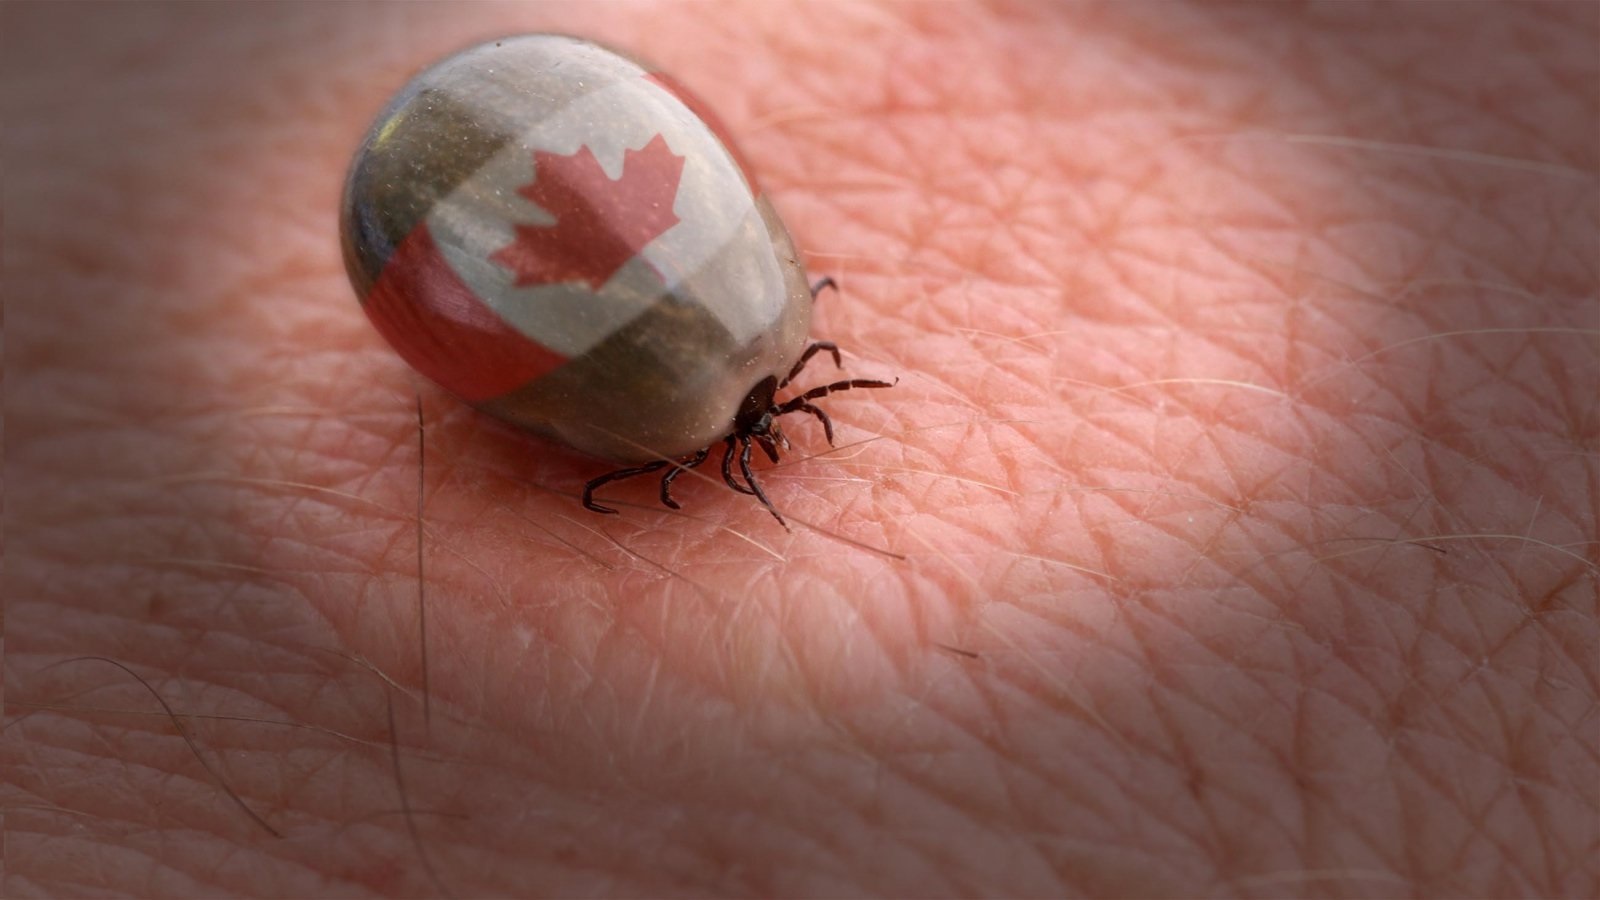 Evaluation Of Practices Is Key For Lyme Disease Strategy